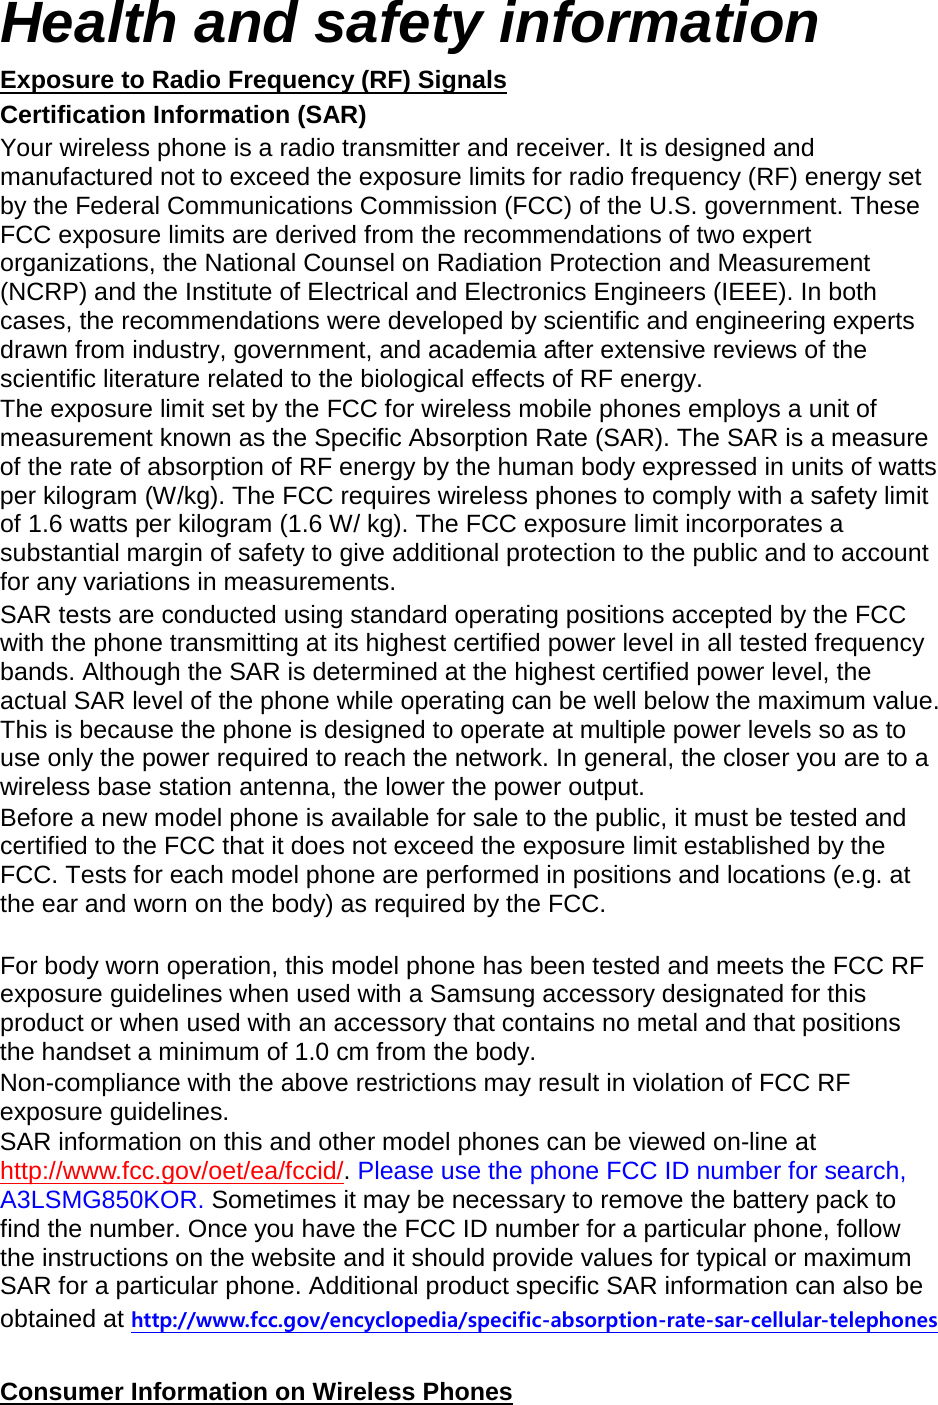 Health and safety information Exposure to Radio Frequency (RF) Signals Certification Information (SAR) Your wireless phone is a radio transmitter and receiver. It is designed and manufactured not to exceed the exposure limits for radio frequency (RF) energy set by the Federal Communications Commission (FCC) of the U.S. government. These FCC exposure limits are derived from the recommendations of two expert organizations, the National Counsel on Radiation Protection and Measurement (NCRP) and the Institute of Electrical and Electronics Engineers (IEEE). In both cases, the recommendations were developed by scientific and engineering experts drawn from industry, government, and academia after extensive reviews of the scientific literature related to the biological effects of RF energy. The exposure limit set by the FCC for wireless mobile phones employs a unit of measurement known as the Specific Absorption Rate (SAR). The SAR is a measure of the rate of absorption of RF energy by the human body expressed in units of watts per kilogram (W/kg). The FCC requires wireless phones to comply with a safety limit of 1.6 watts per kilogram (1.6 W/ kg). The FCC exposure limit incorporates a substantial margin of safety to give additional protection to the public and to account for any variations in measurements. SAR tests are conducted using standard operating positions accepted by the FCC with the phone transmitting at its highest certified power level in all tested frequency bands. Although the SAR is determined at the highest certified power level, the actual SAR level of the phone while operating can be well below the maximum value. This is because the phone is designed to operate at multiple power levels so as to use only the power required to reach the network. In general, the closer you are to a wireless base station antenna, the lower the power output. Before a new model phone is available for sale to the public, it must be tested and certified to the FCC that it does not exceed the exposure limit established by the FCC. Tests for each model phone are performed in positions and locations (e.g. at the ear and worn on the body) as required by the FCC.      For body worn operation, this model phone has been tested and meets the FCC RF exposure guidelines when used with a Samsung accessory designated for this product or when used with an accessory that contains no metal and that positions the handset a minimum of 1.0 cm from the body.   Non-compliance with the above restrictions may result in violation of FCC RF exposure guidelines. SAR information on this and other model phones can be viewed on-line at http://www.fcc.gov/oet/ea/fccid/. Please use the phone FCC ID number for search, A3LSMG850KOR. Sometimes it may be necessary to remove the battery pack to find the number. Once you have the FCC ID number for a particular phone, follow the instructions on the website and it should provide values for typical or maximum SAR for a particular phone. Additional product specific SAR information can also be obtained at http://www.fcc.gov/encyclopedia/specific-absorption-rate-sar-cellular-telephones  Consumer Information on Wireless Phones 